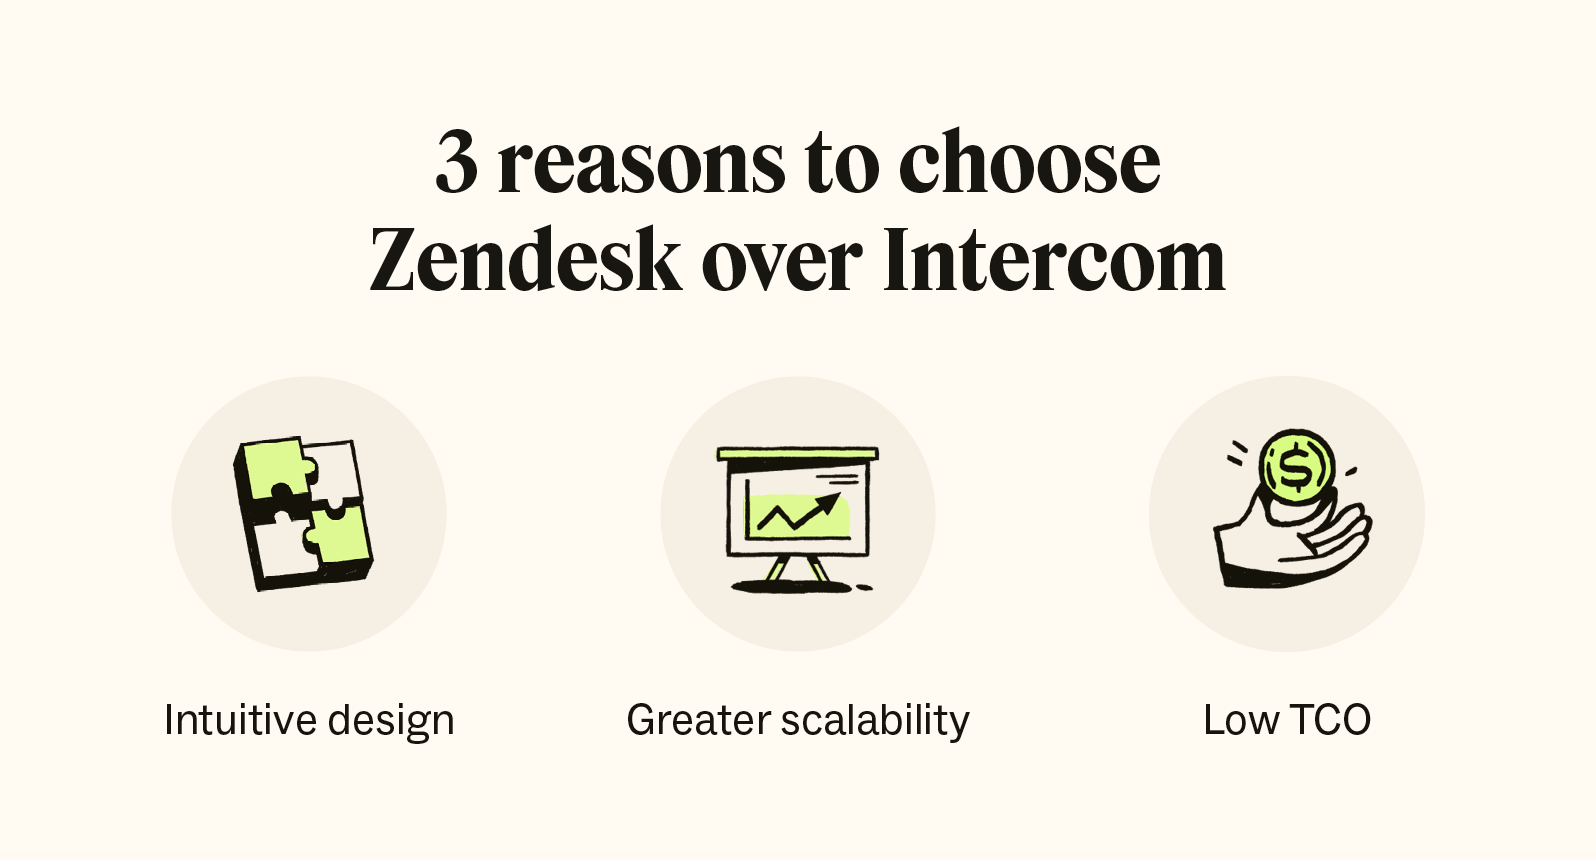 Three icons show reasons why businesses choose Zendesk vs. Intercom, including an intuitive design, scalability, and low TCO.